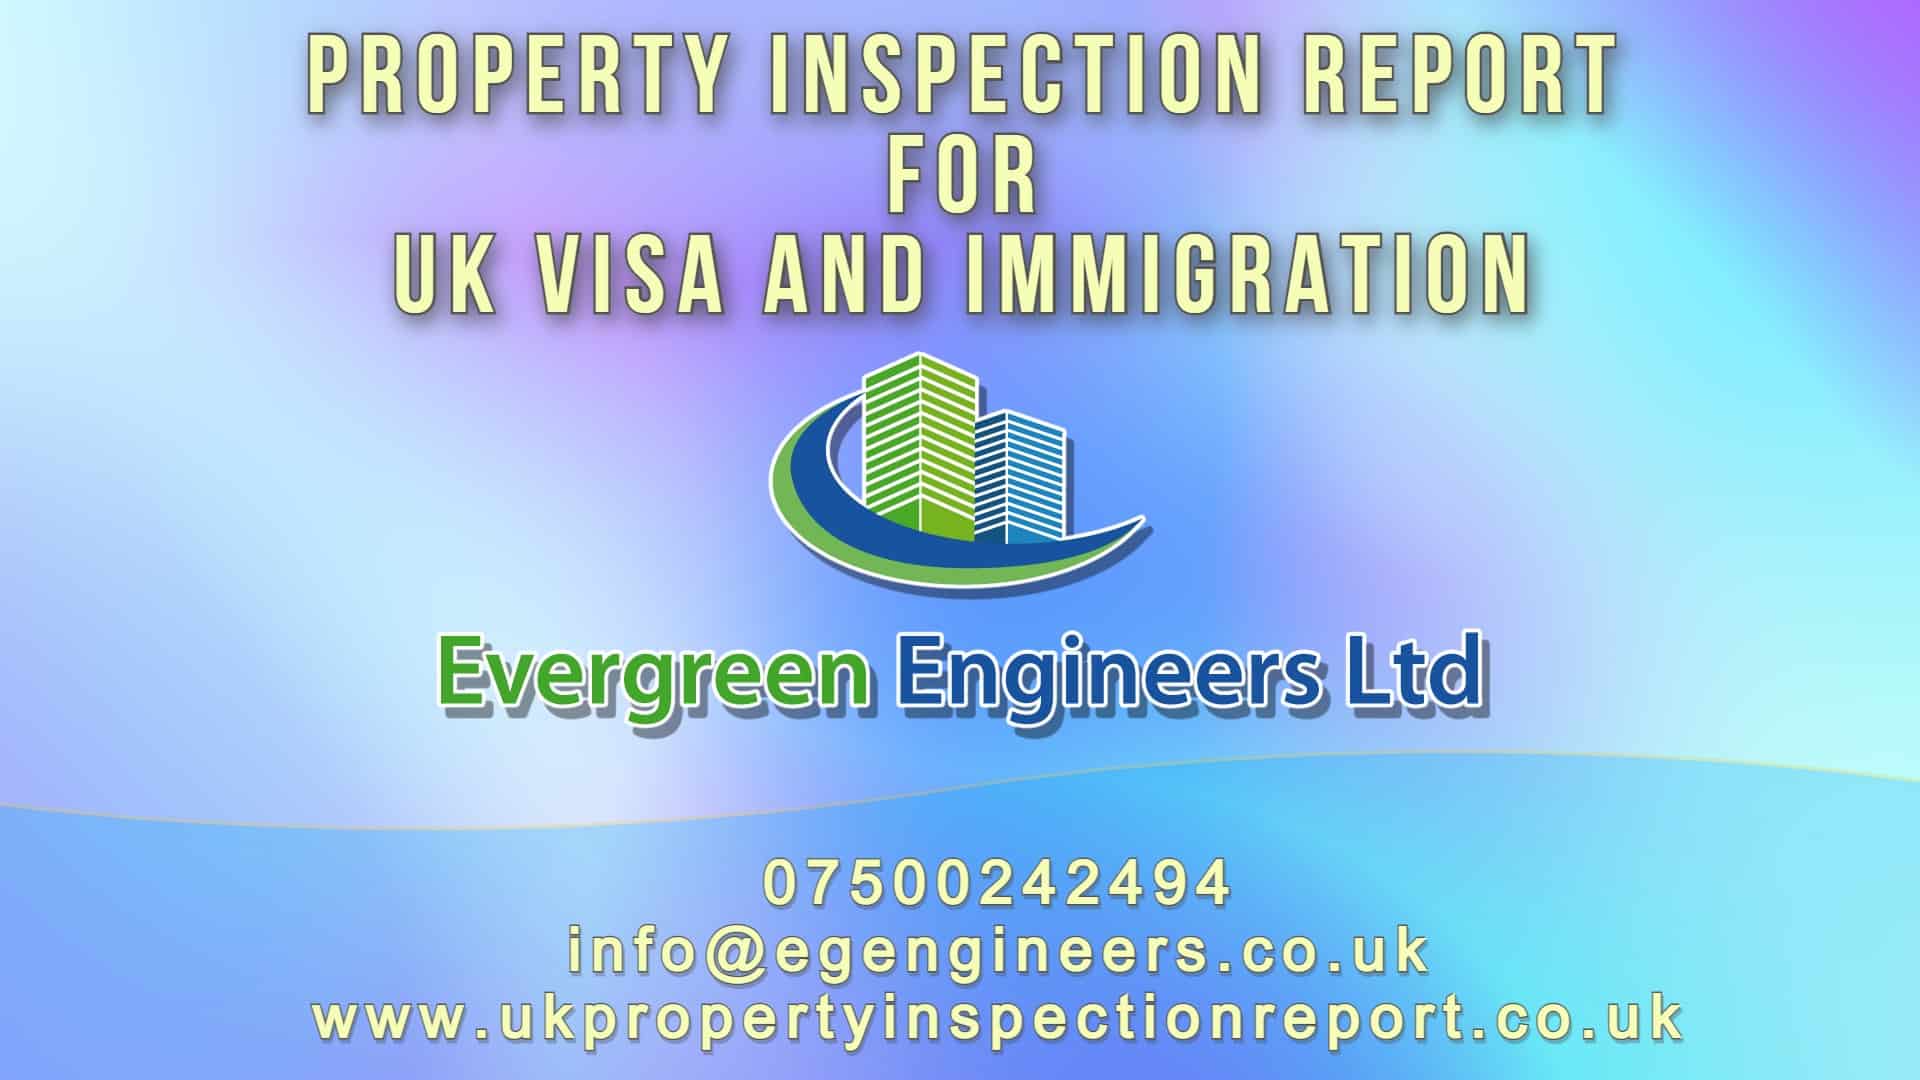 What is included on property inspection report for UK visa and Immigration